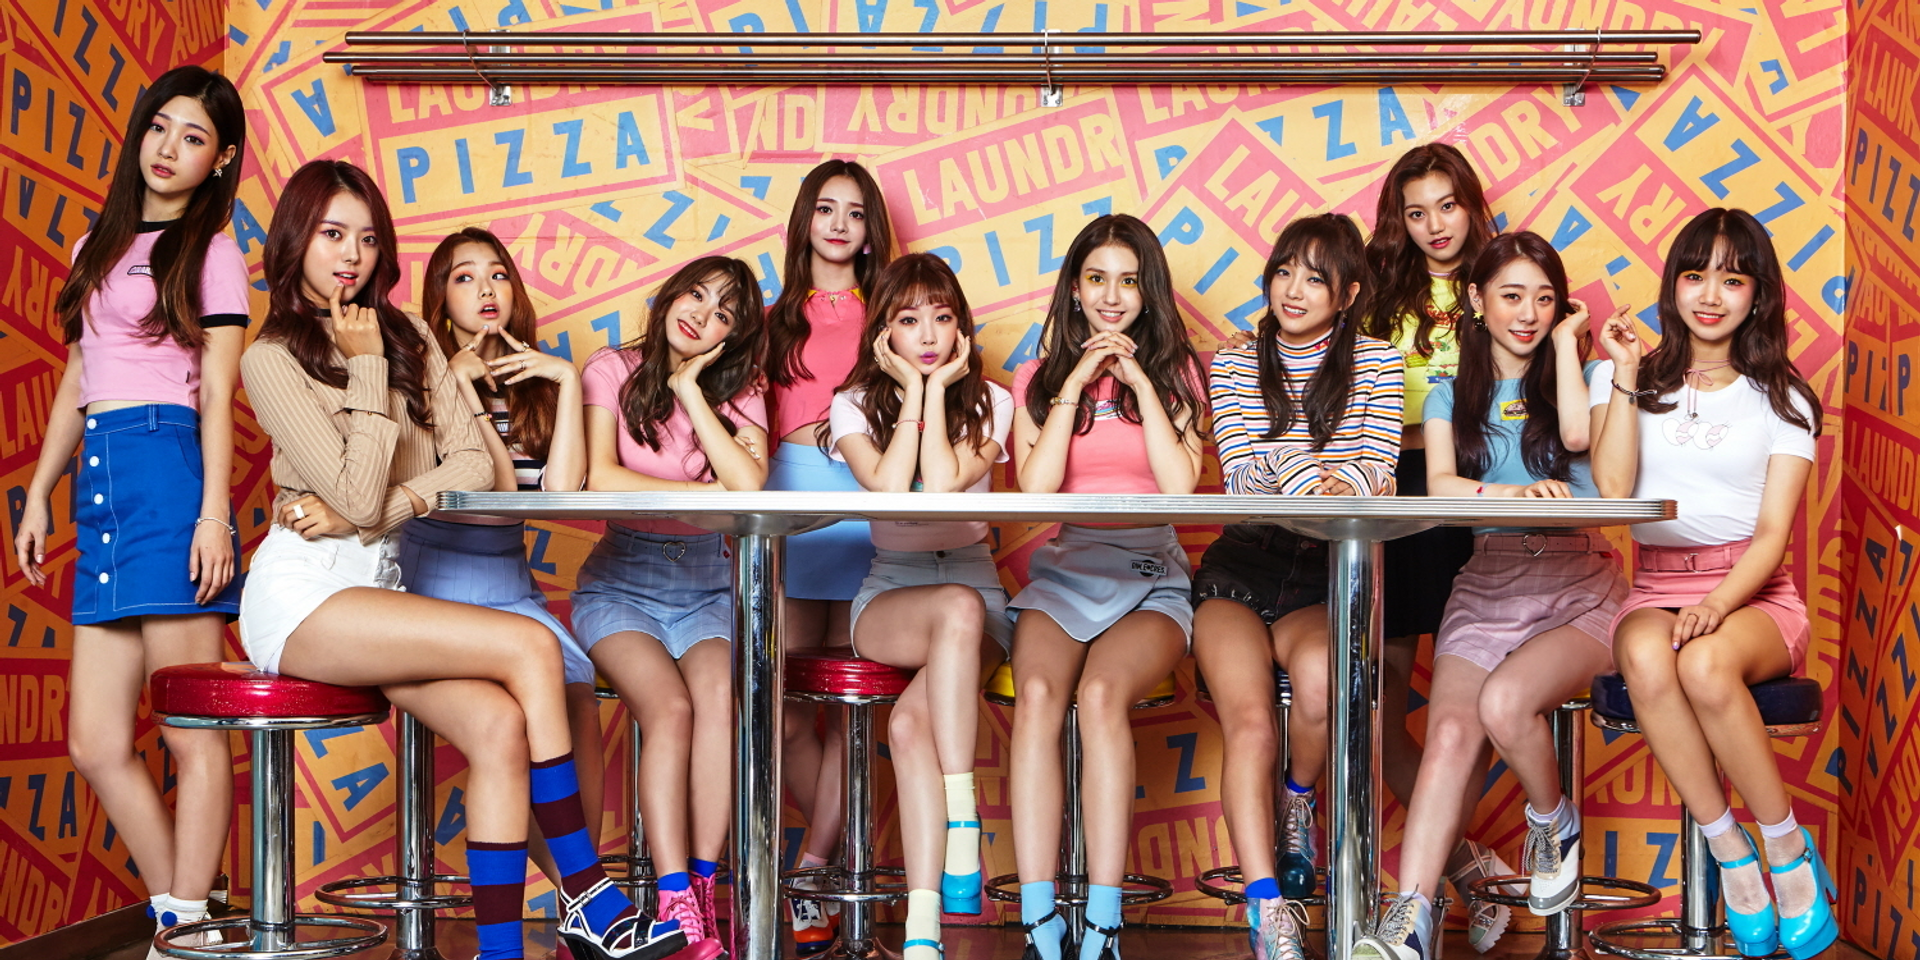 K-pop girl group I.O.I to reunite in October, Chung Ha and eight